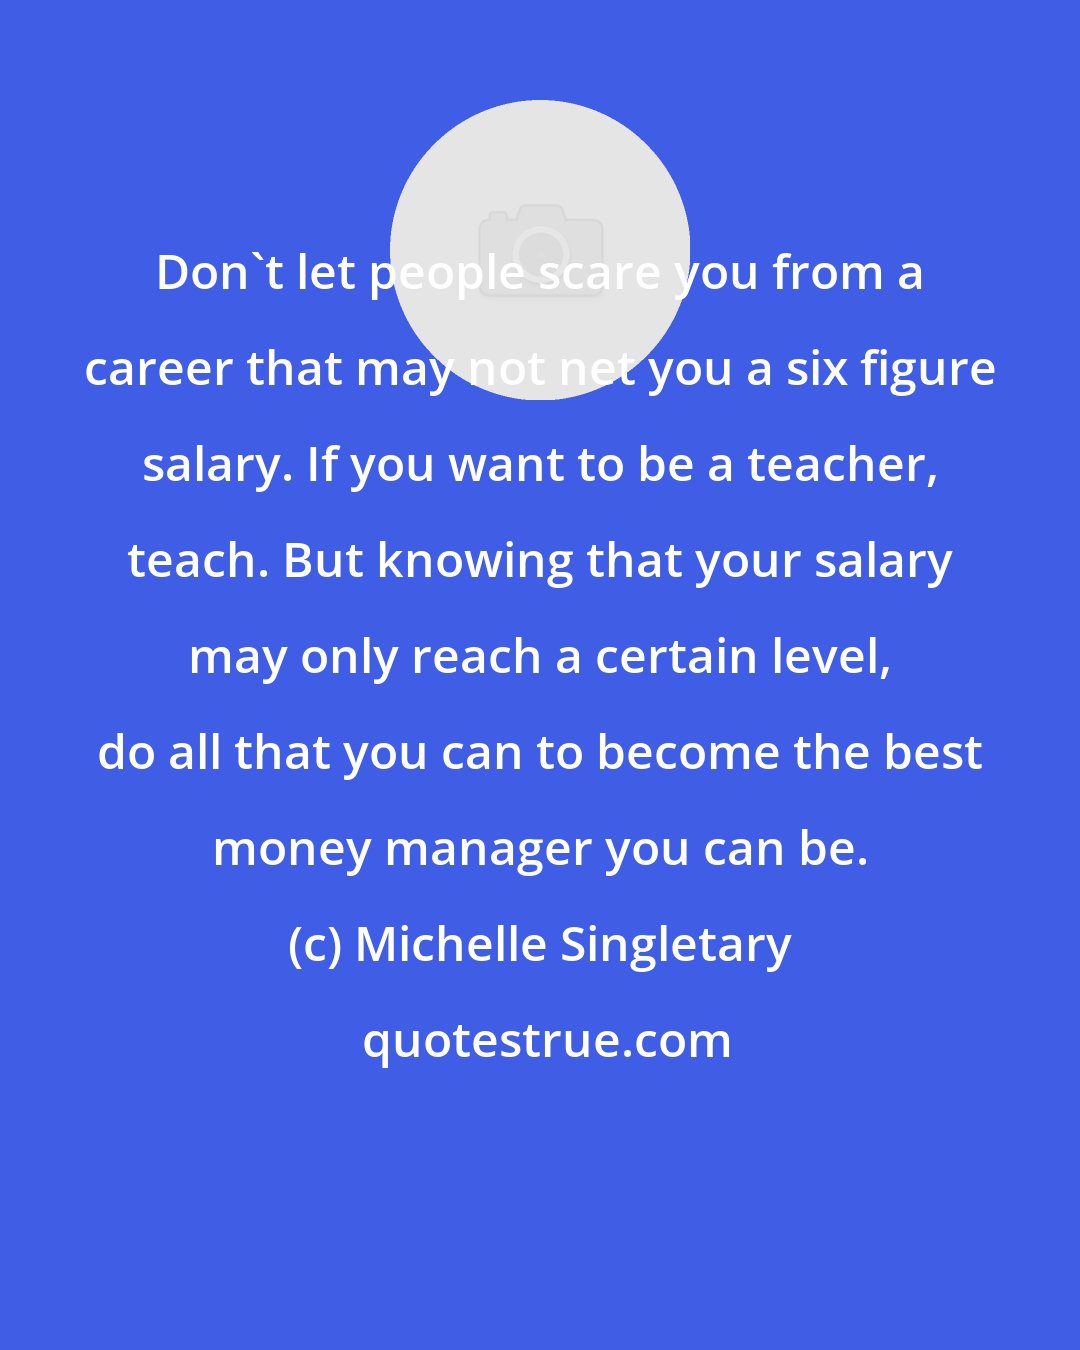 Michelle Singletary: Don't let people scare you from a career that may not net you a six figure salary. If you want to be a teacher, teach. But knowing that your salary may only reach a certain level, do all that you can to become the best money manager you can be.